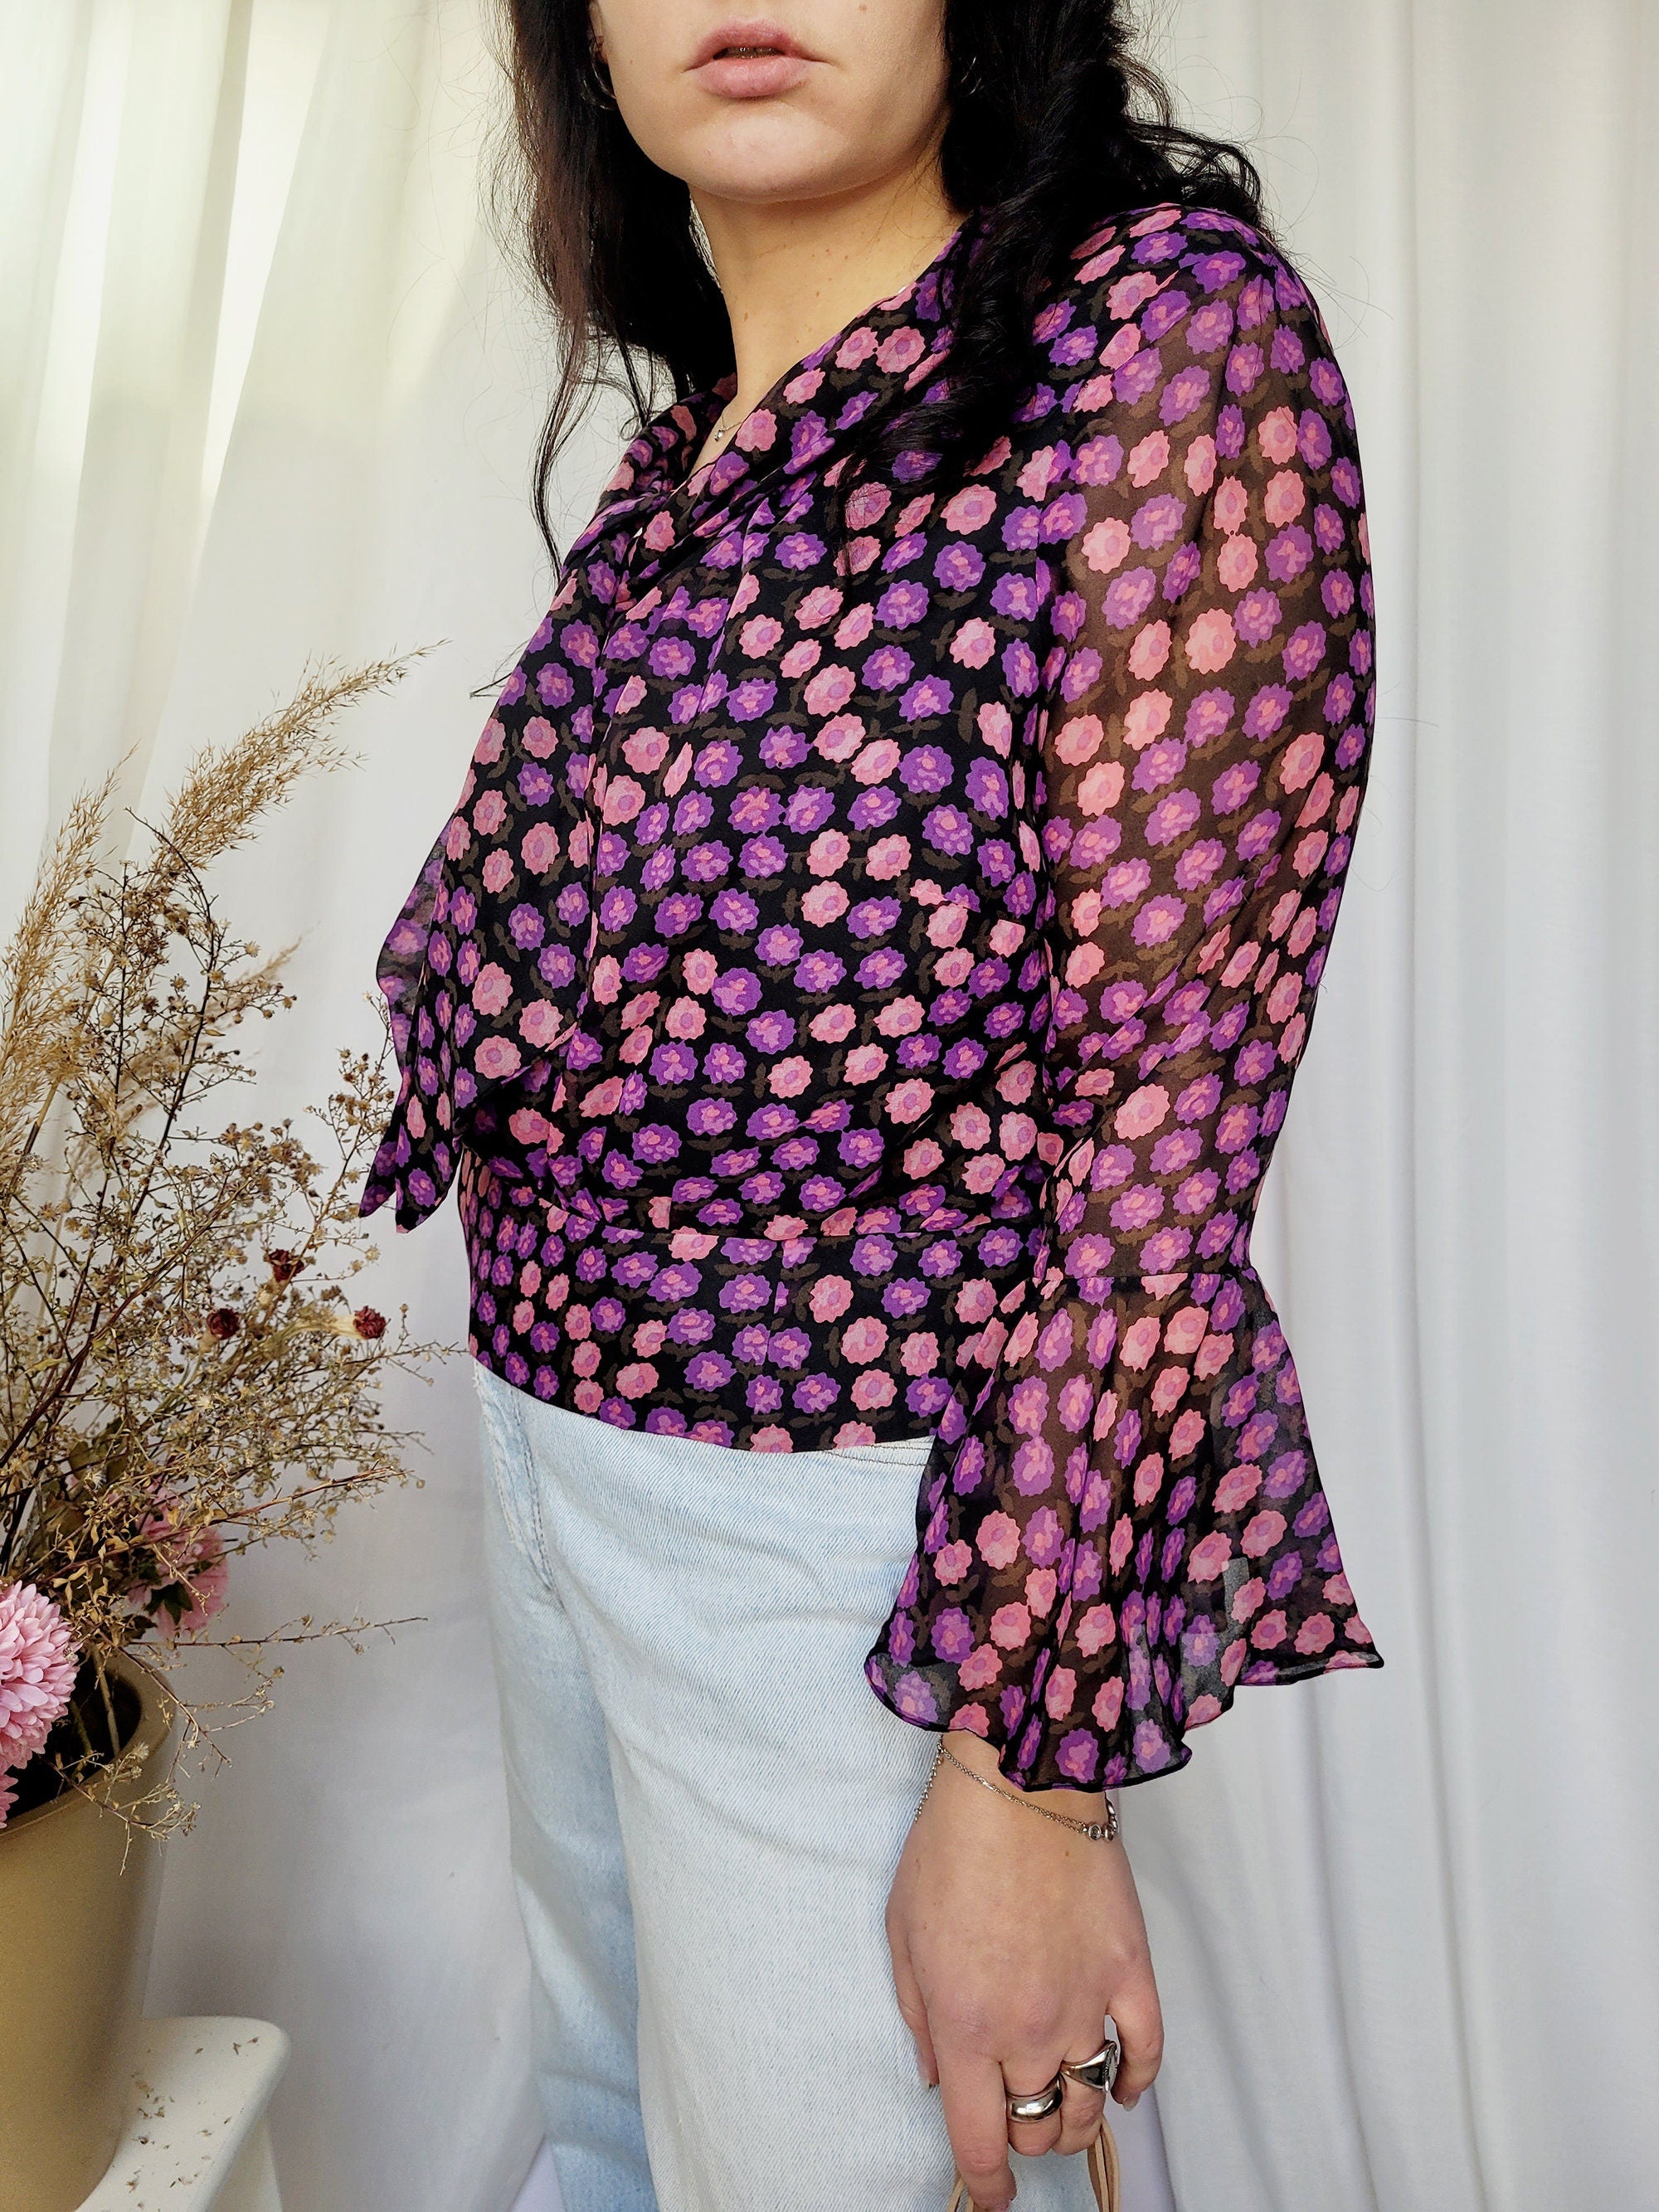 80s purple floral flare sleeve bow collar smart blouse top